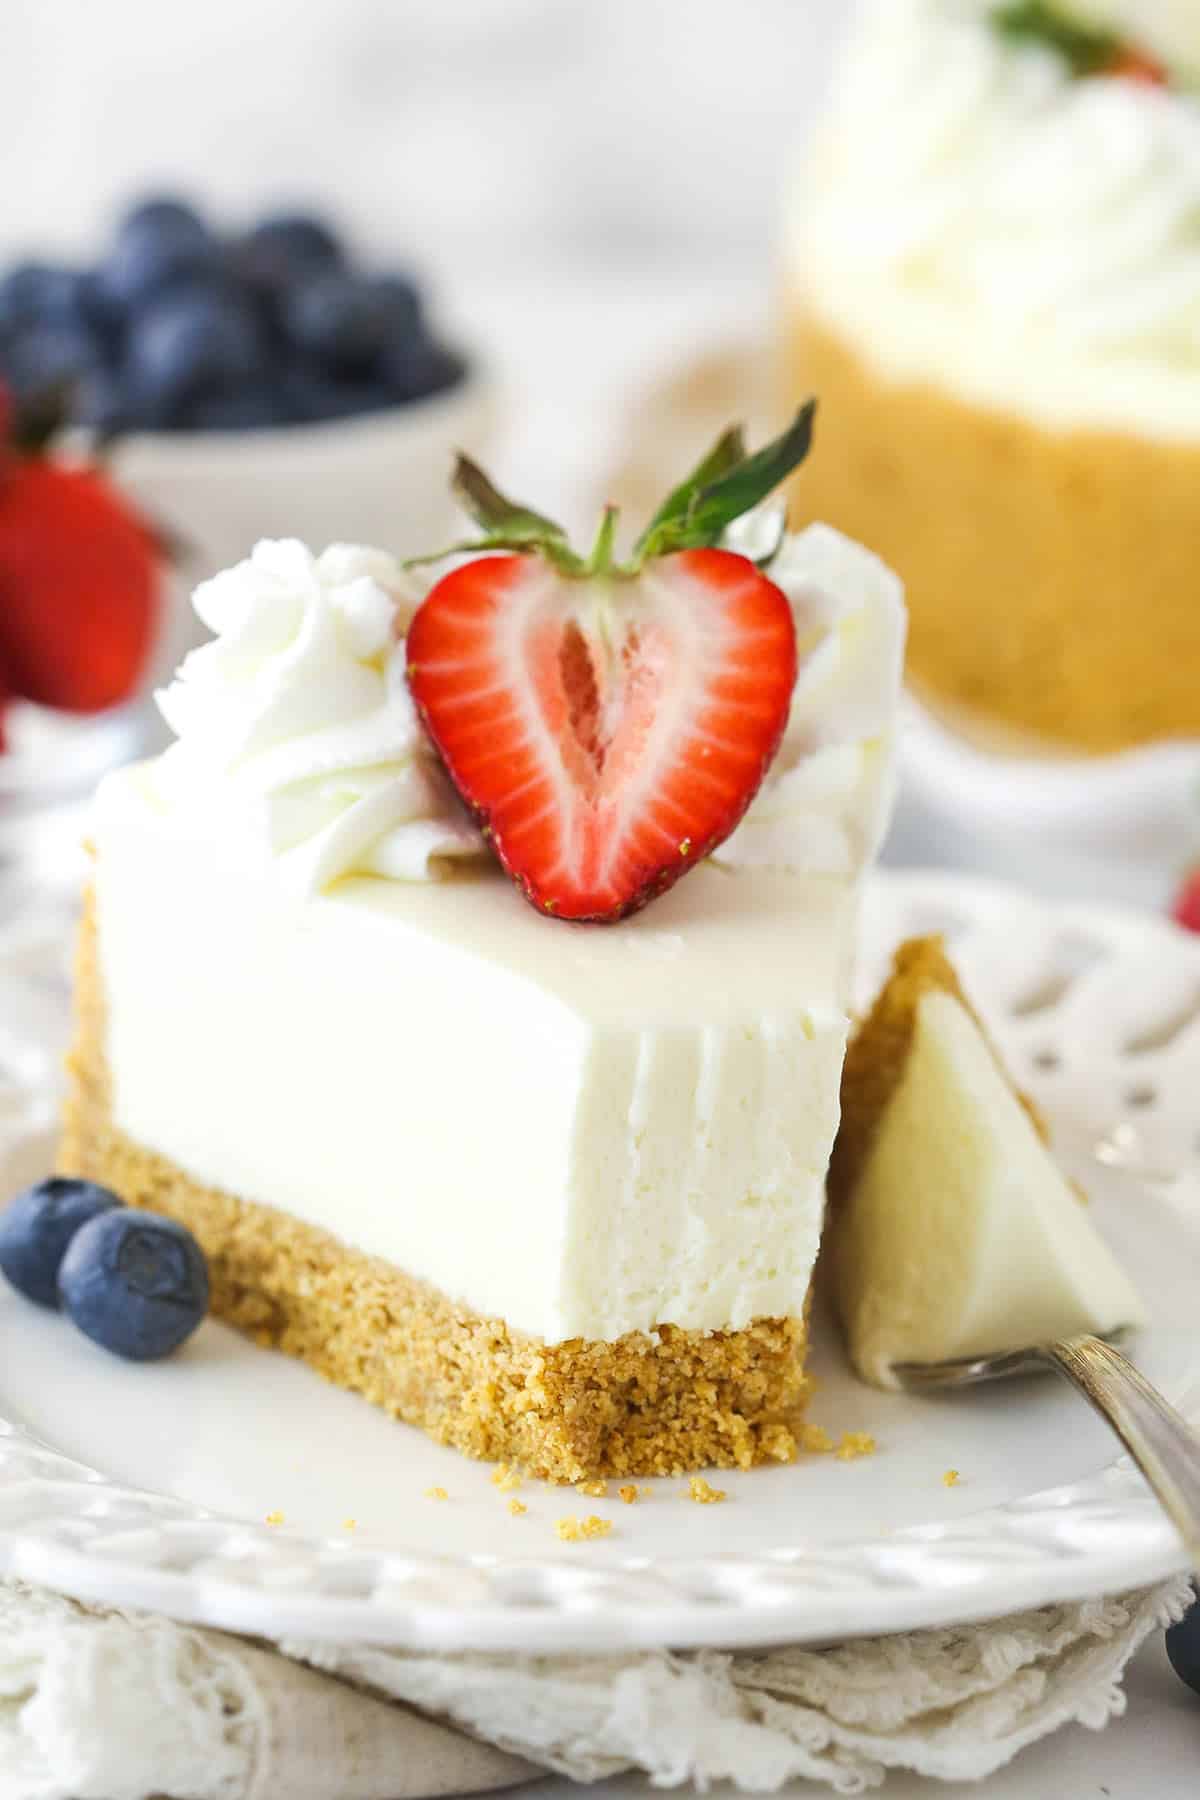 A slice of no bake cheesecake on a plate with a bite taken out of it.